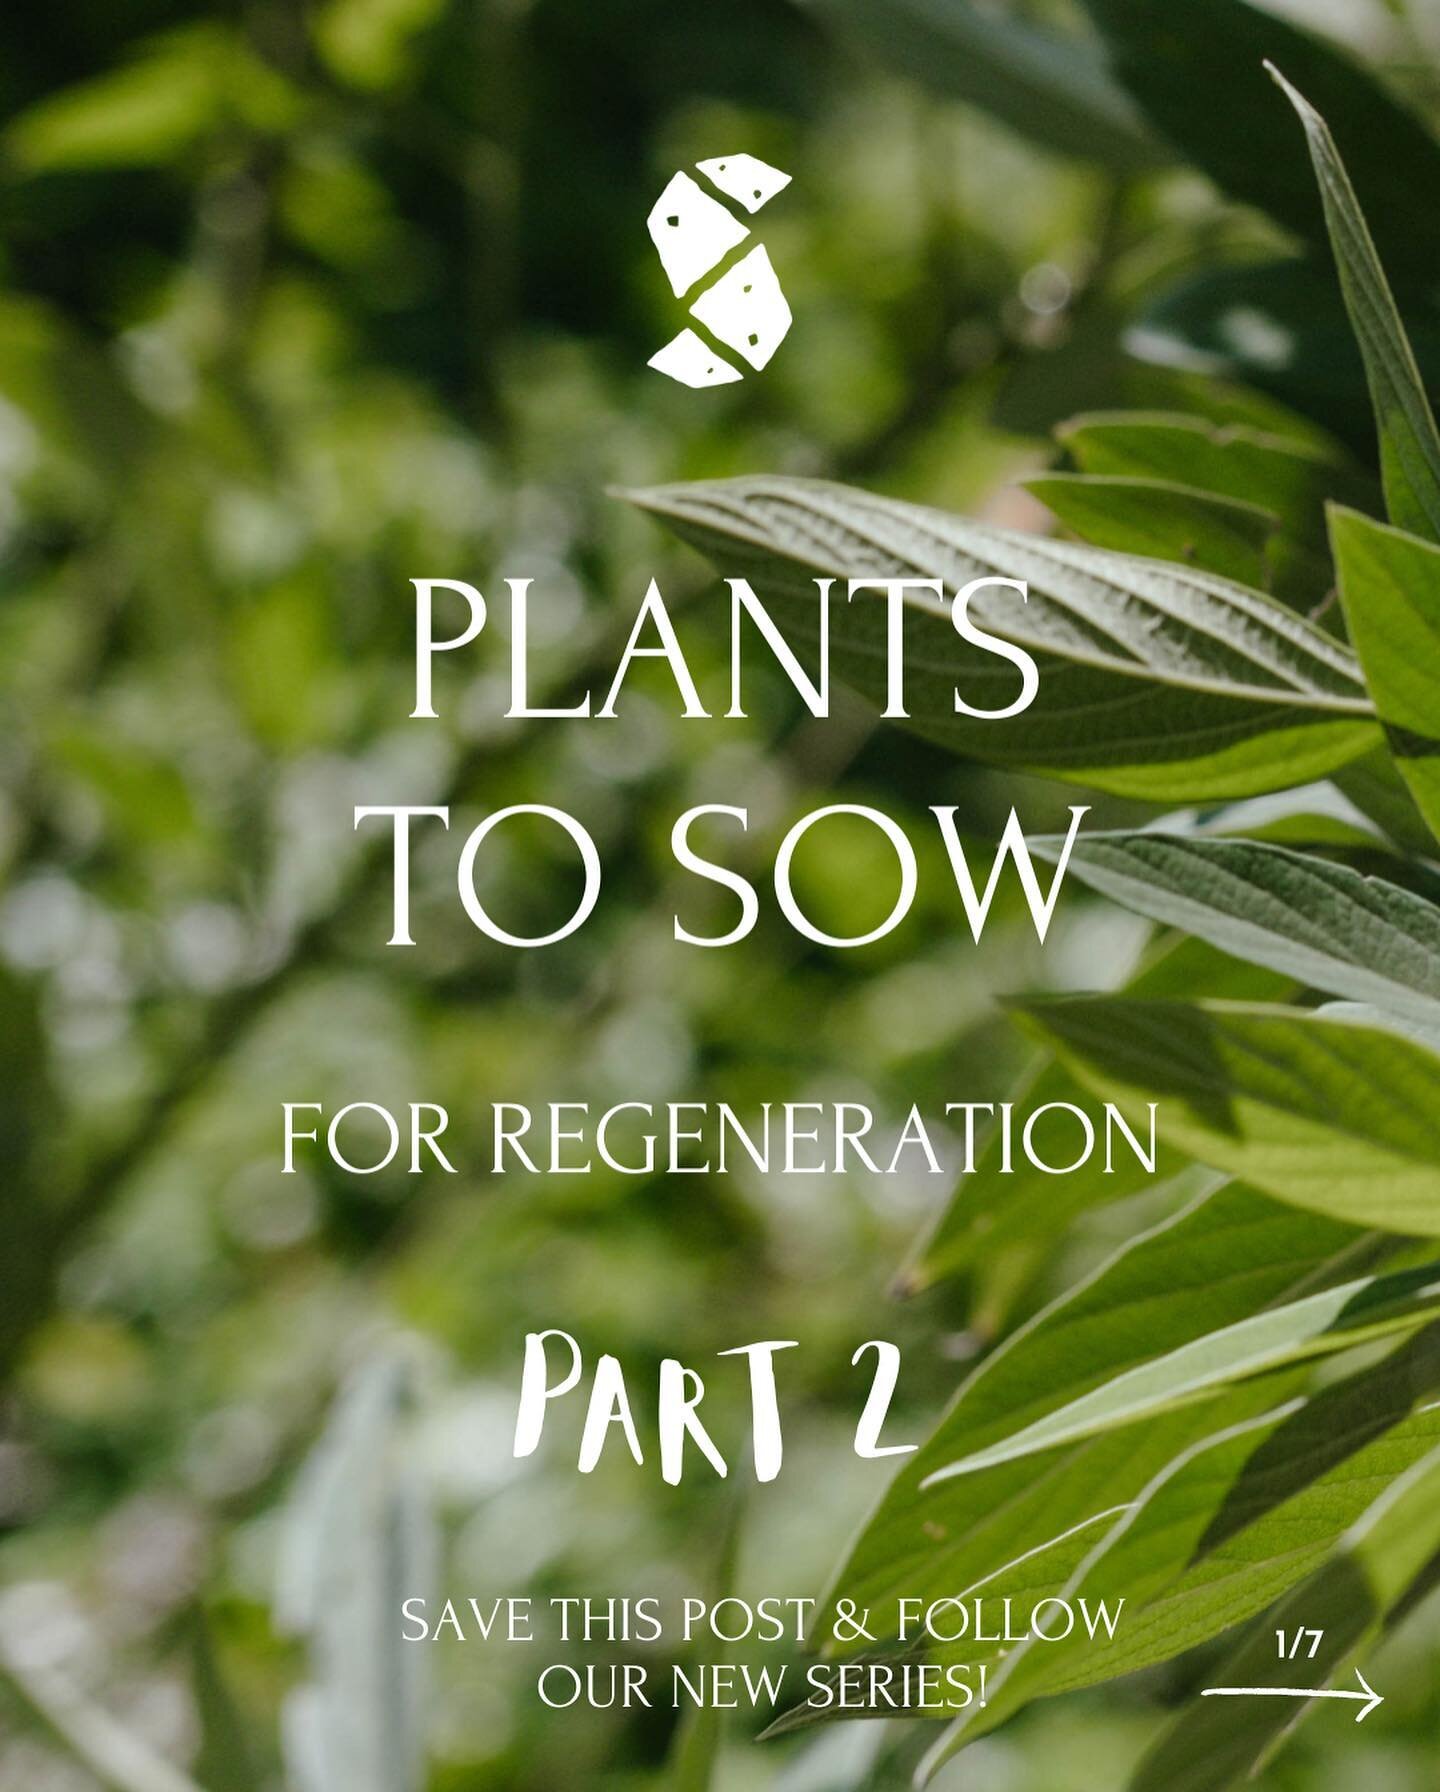 Plants To Sow For Regeneration: Part 2 ✌🏼 

Plants don't just take nutrients from the soil, they nurture the soil as they grow too. Some more so than others! Follow our new series where we explore some super plants that are great for amending poor s